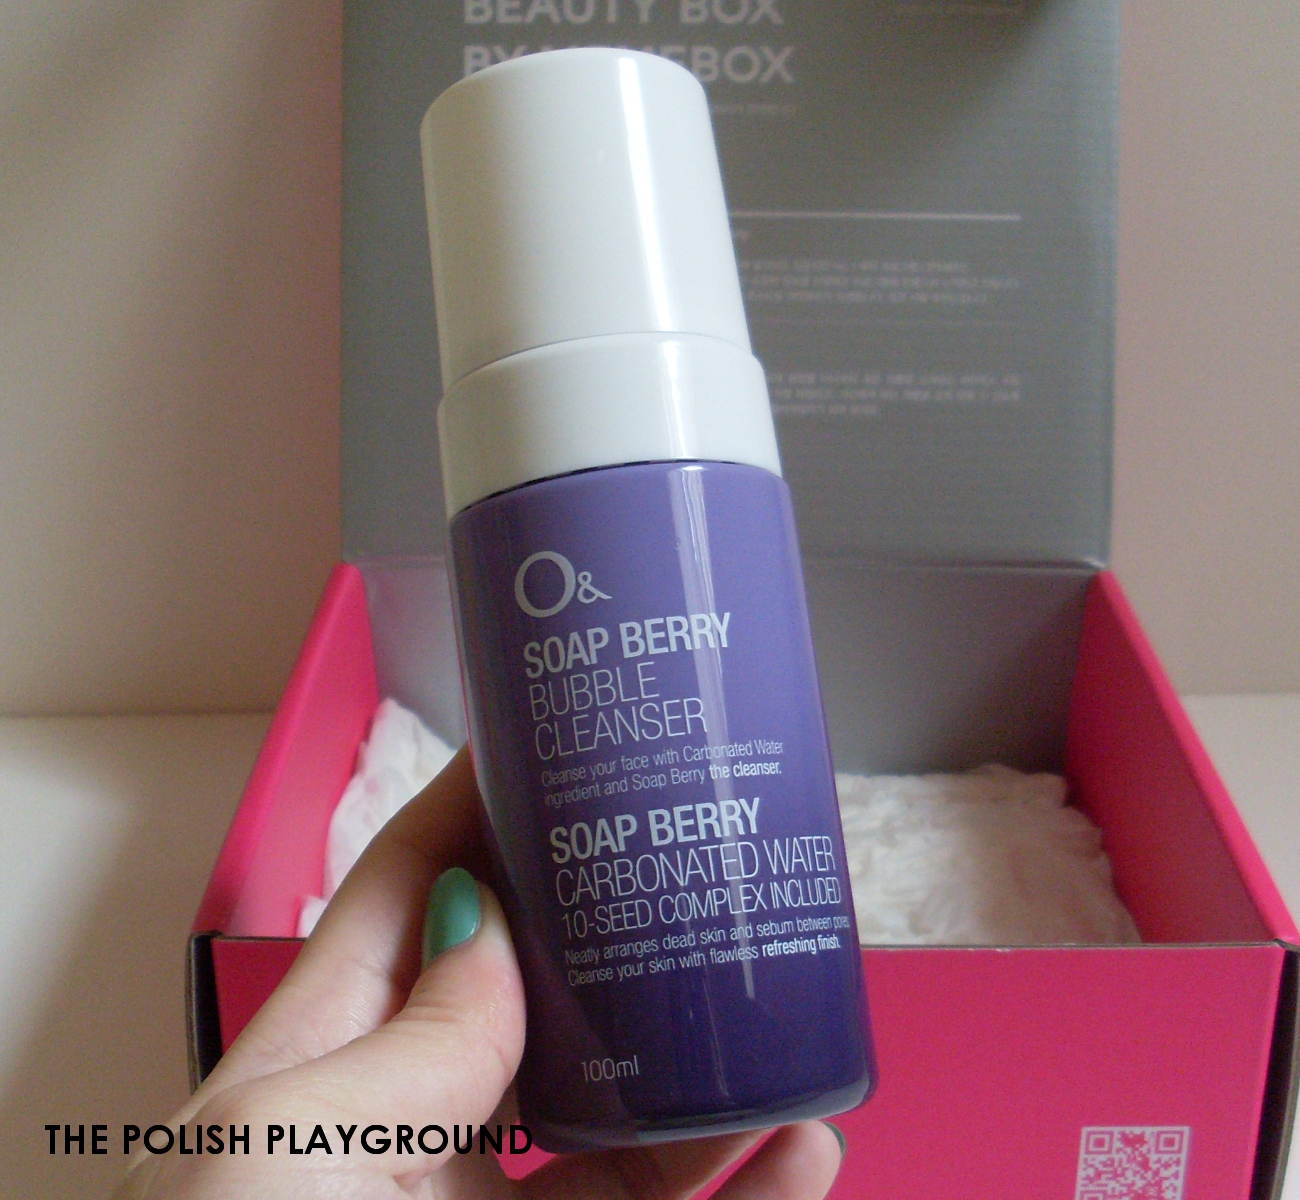 Memebox Luckybox #5 Unboxing - O& Soap Berry Bubble Cleanser